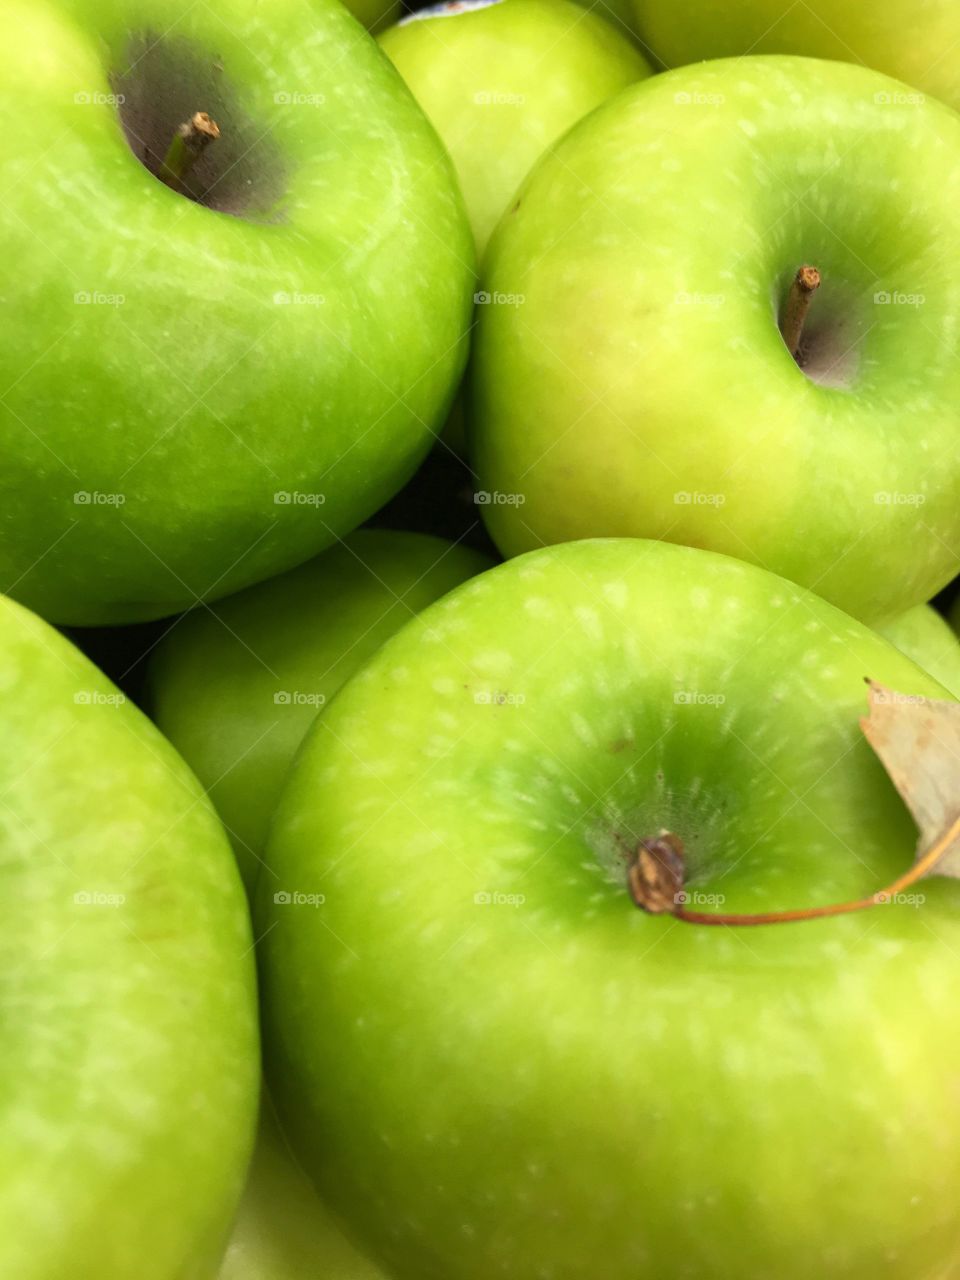 Fresh and delicious green apples. Let the flavor of nature dance in your mouth. You will thank yourself later. Remember...An Apple a day keeps the doctor away!!!